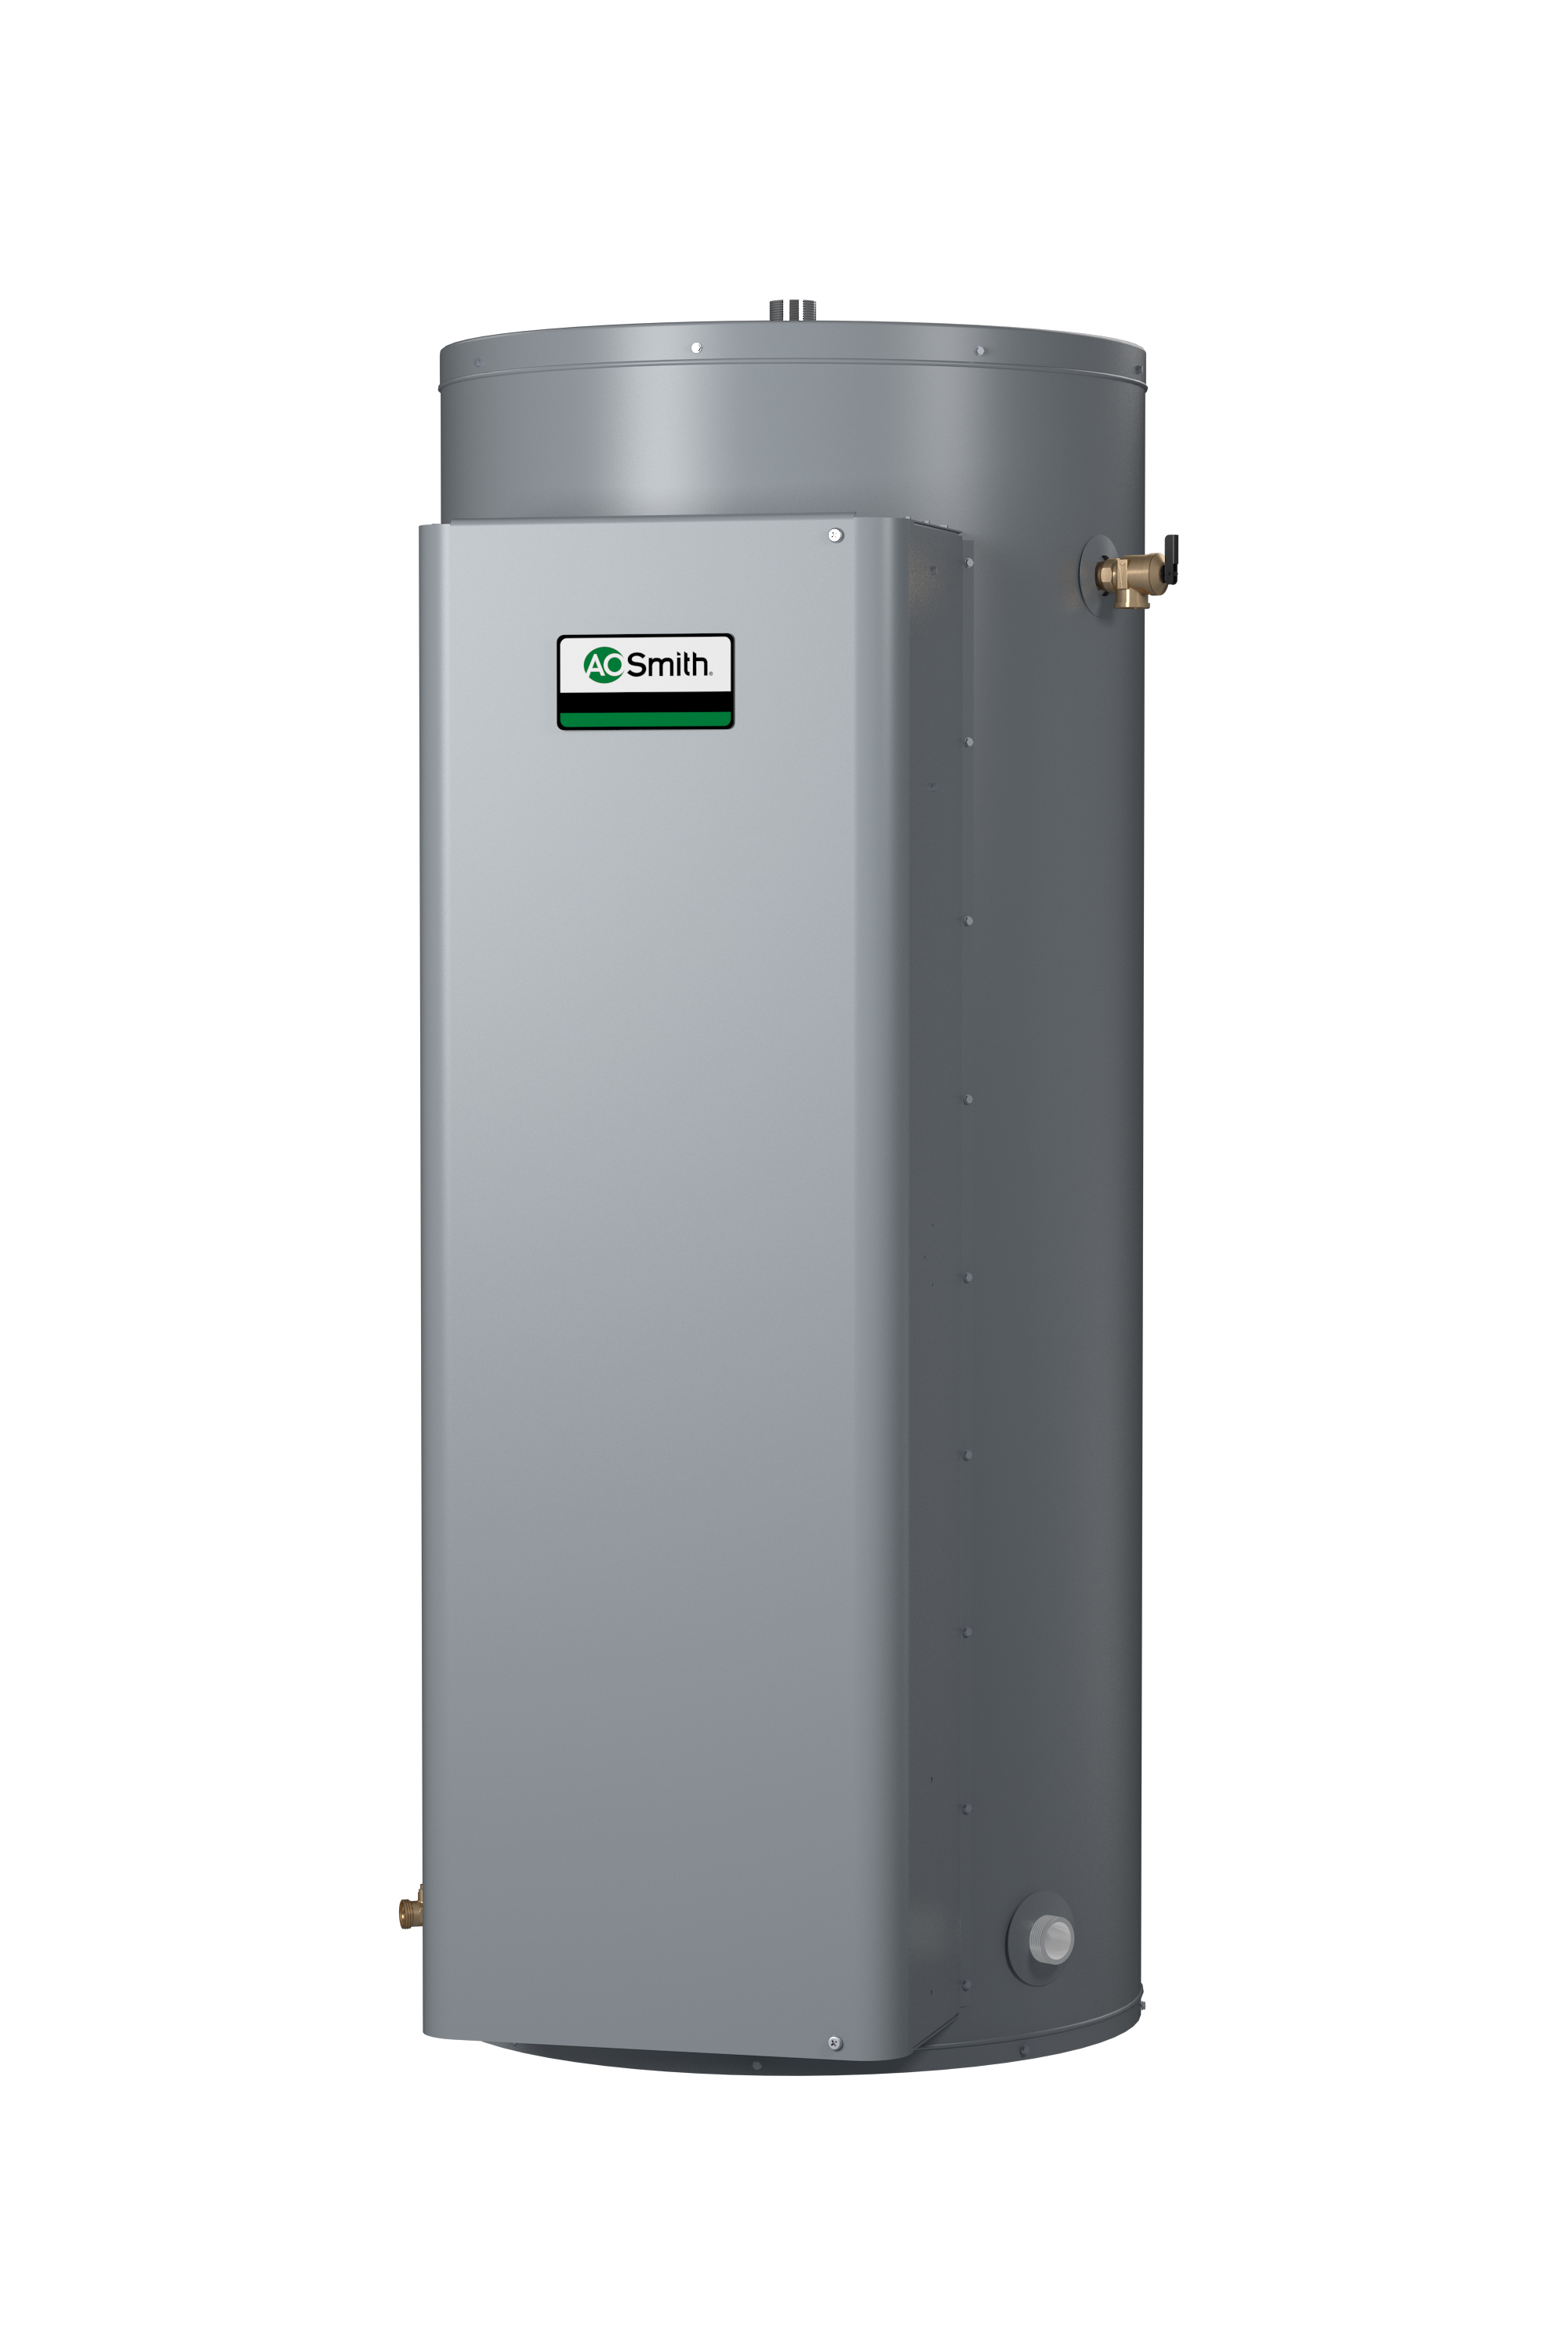 AO SMITH DRE-80A-54, 80 GALLONS, 54.0KW, 208 VOLT, 149.9 AMPS, 3 PHASE, 9 ELEMENT, ASME COMMERCIAL ELECTRIC WATER HEATER, GOLD SERIES